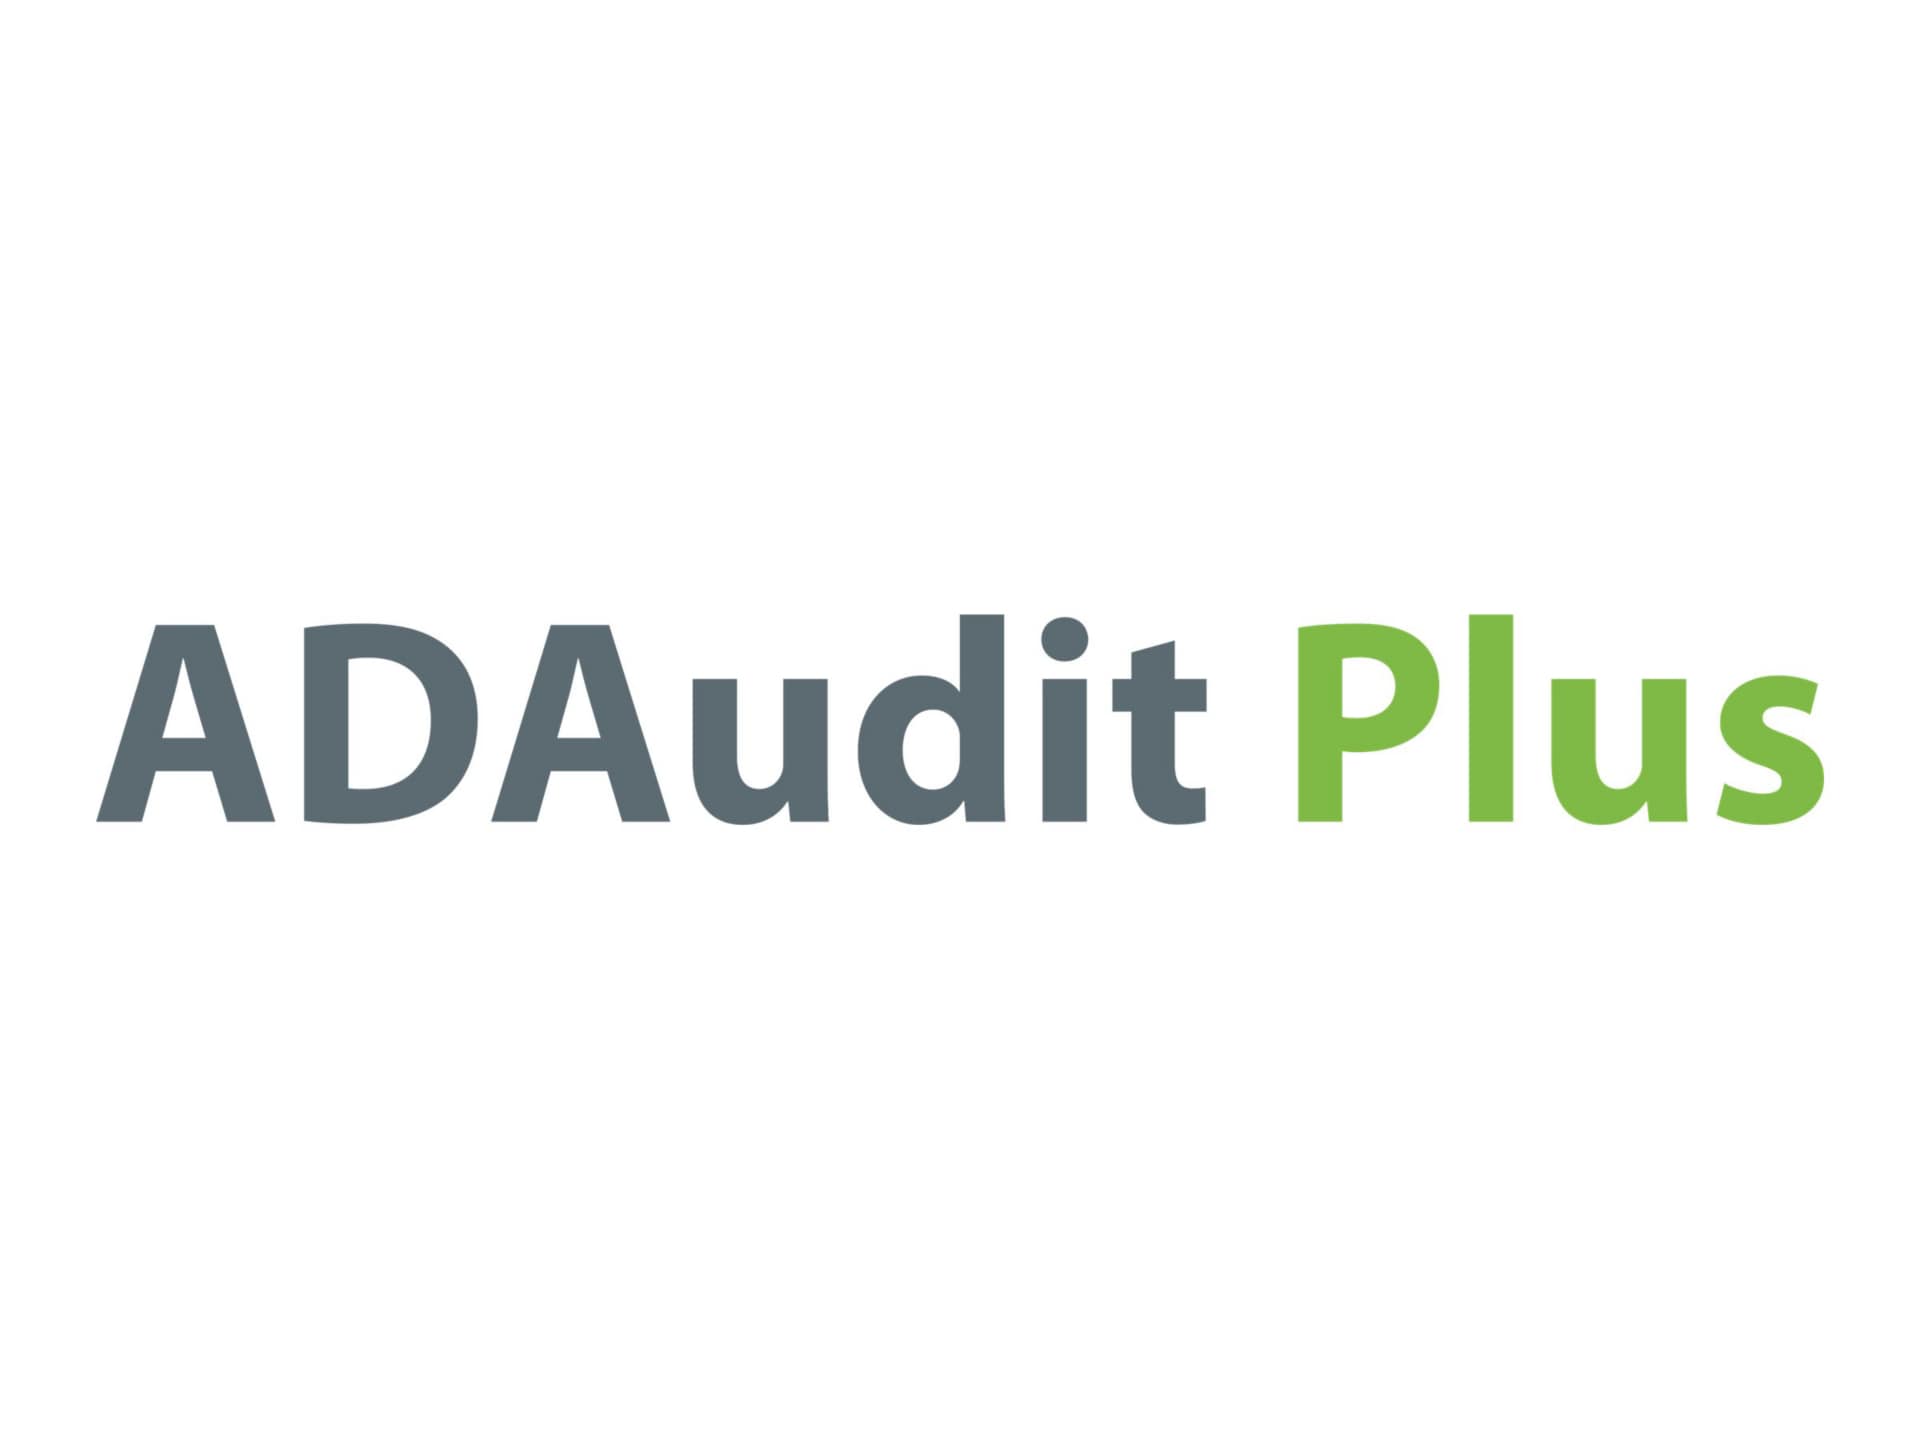 ManageEngine ADAudit Plus Professional Edition Add-on - subscription license (1 year) - 1 Synology NAS Server/NetApp